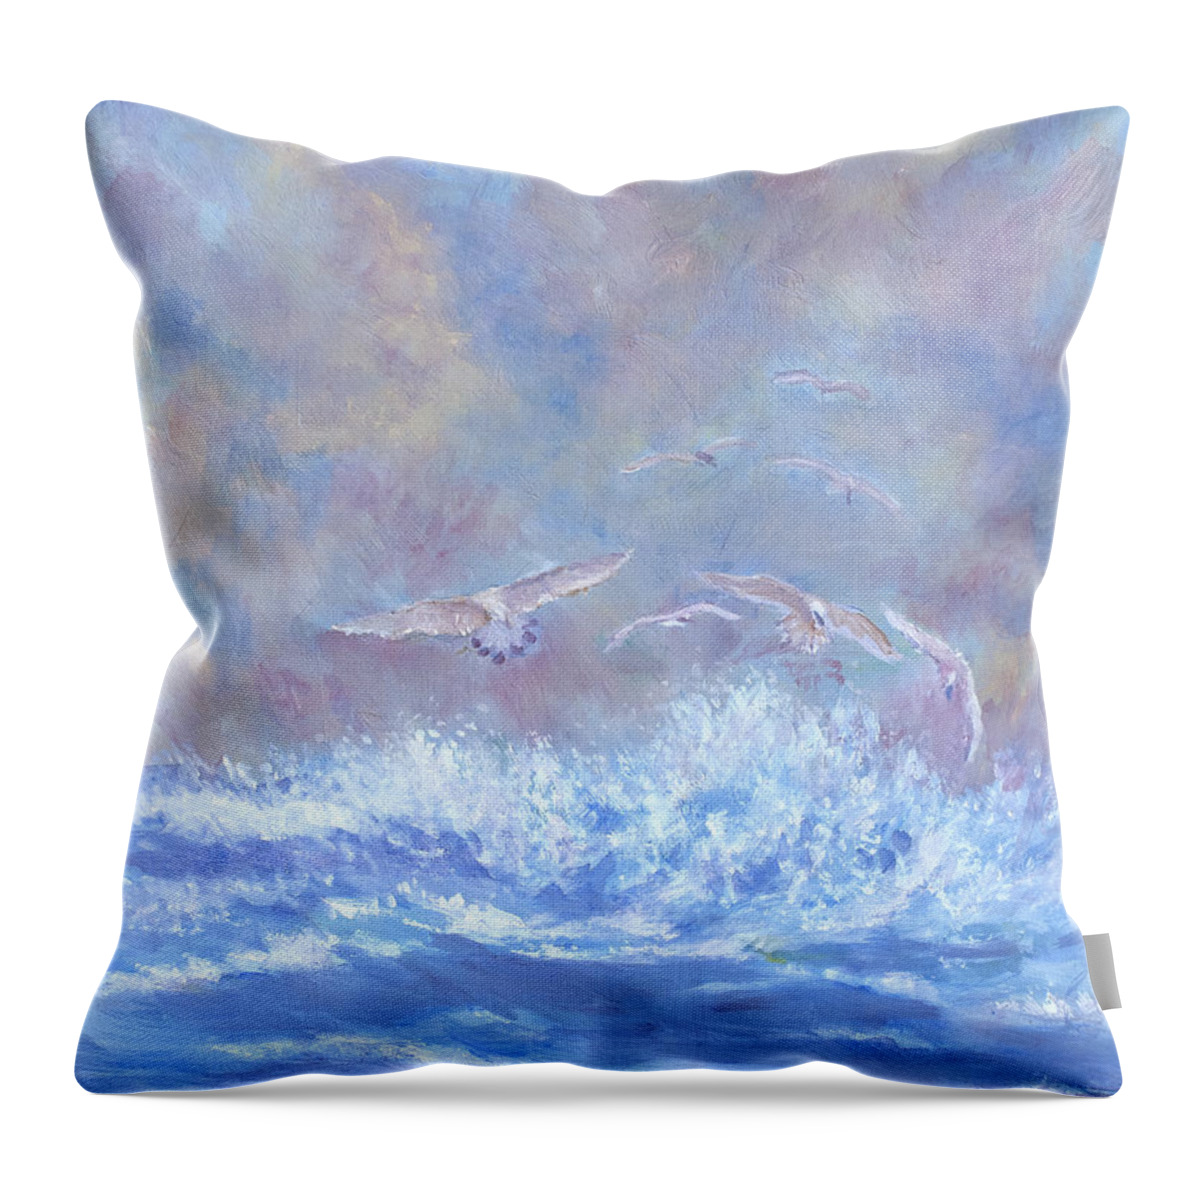 Seascape Throw Pillow featuring the painting Seagulls at Play by Ben Kiger